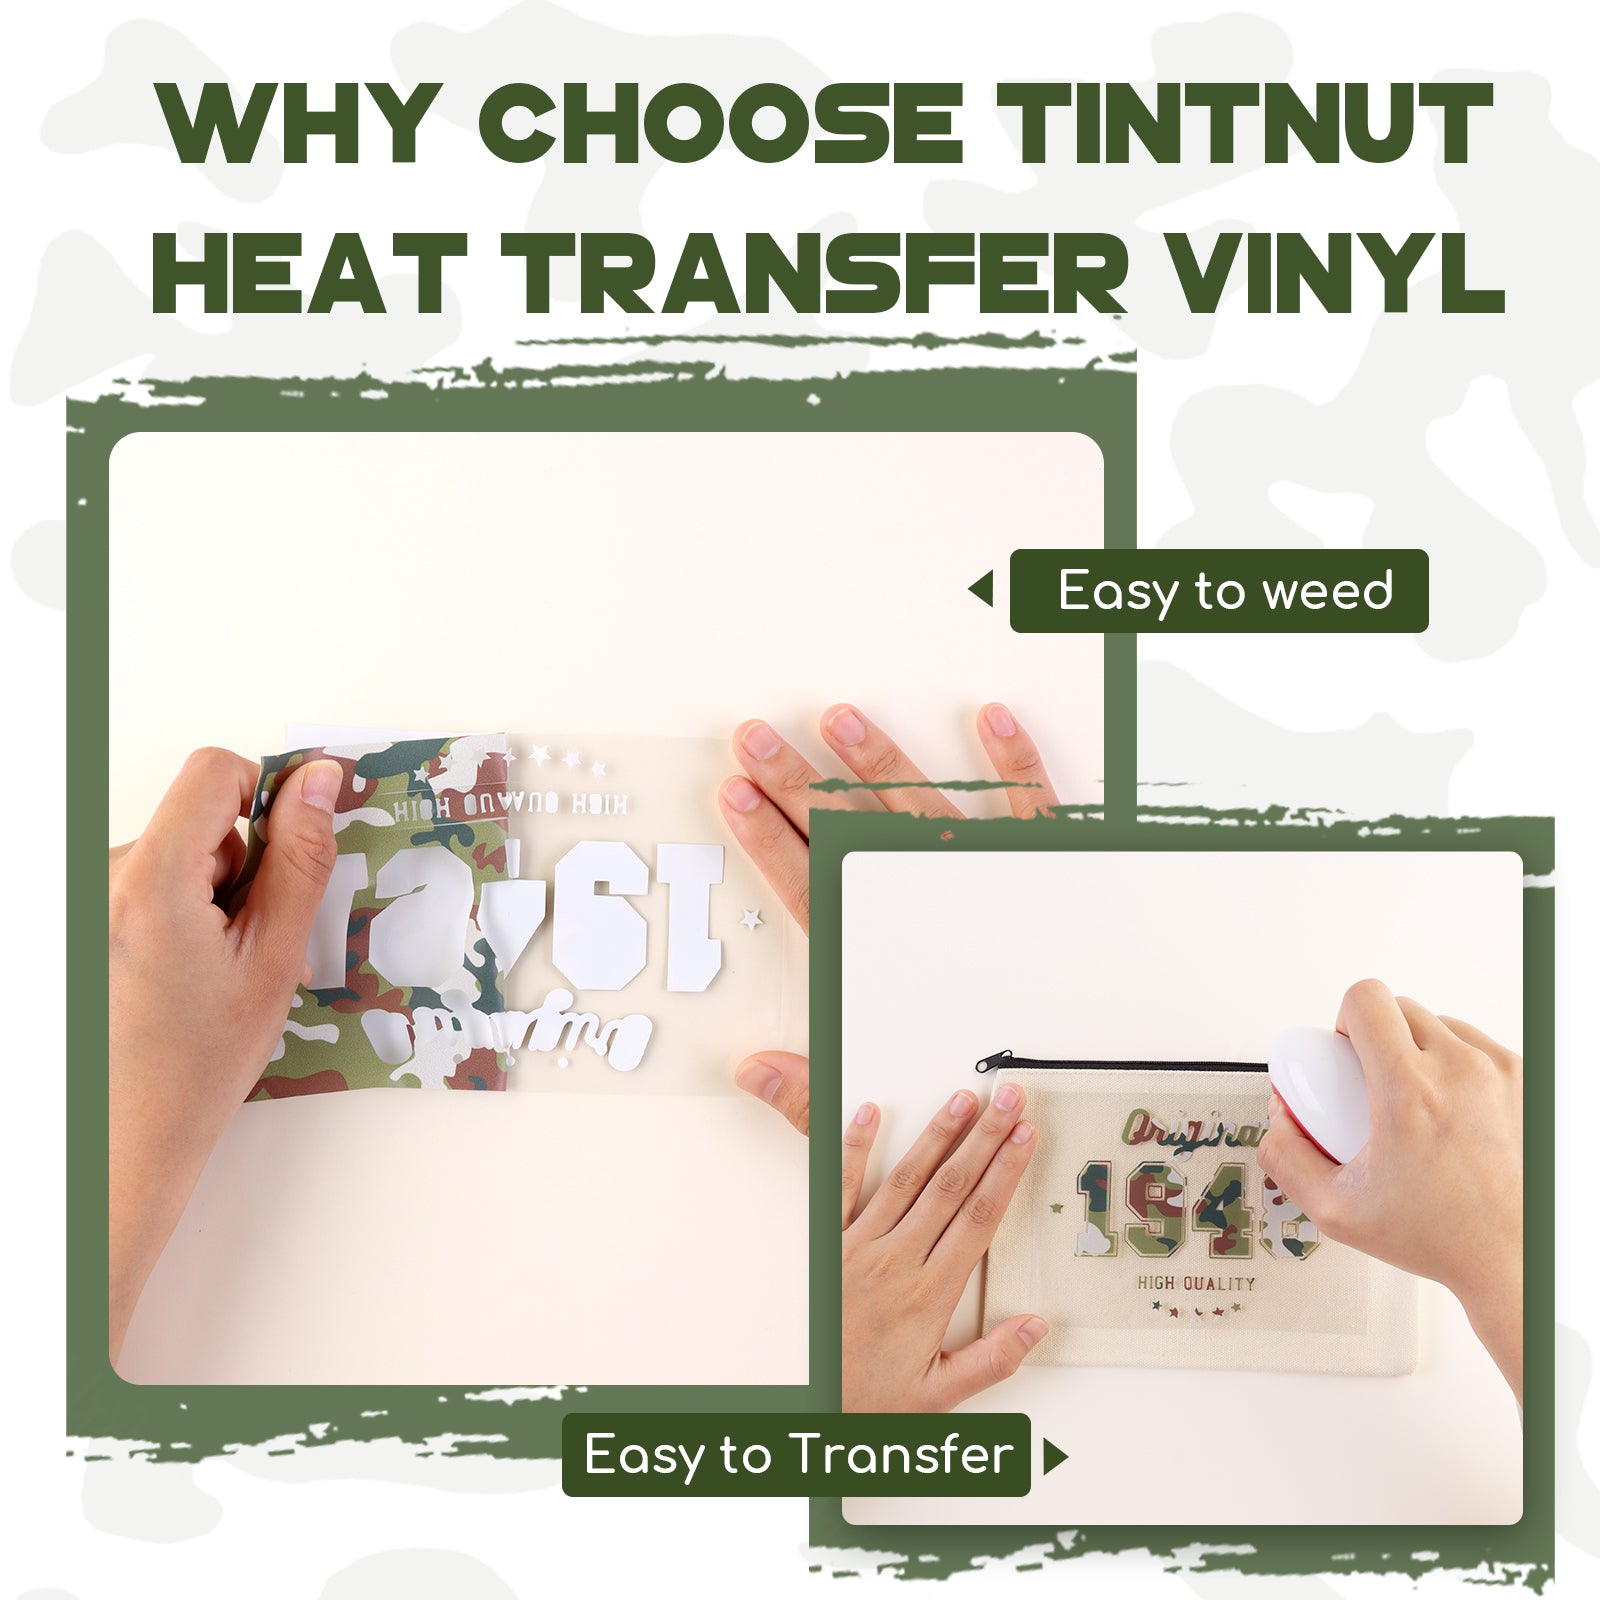  Tintnut HTV Vinyl - 16 Sheets 12 X 10inches Heat Transfer Vinyl  Nude Vinyl Bundle Brown HTV Iron On Vinyl for T-Shirts DIY Compatible with  Cricut Or Silhoutte Cameo